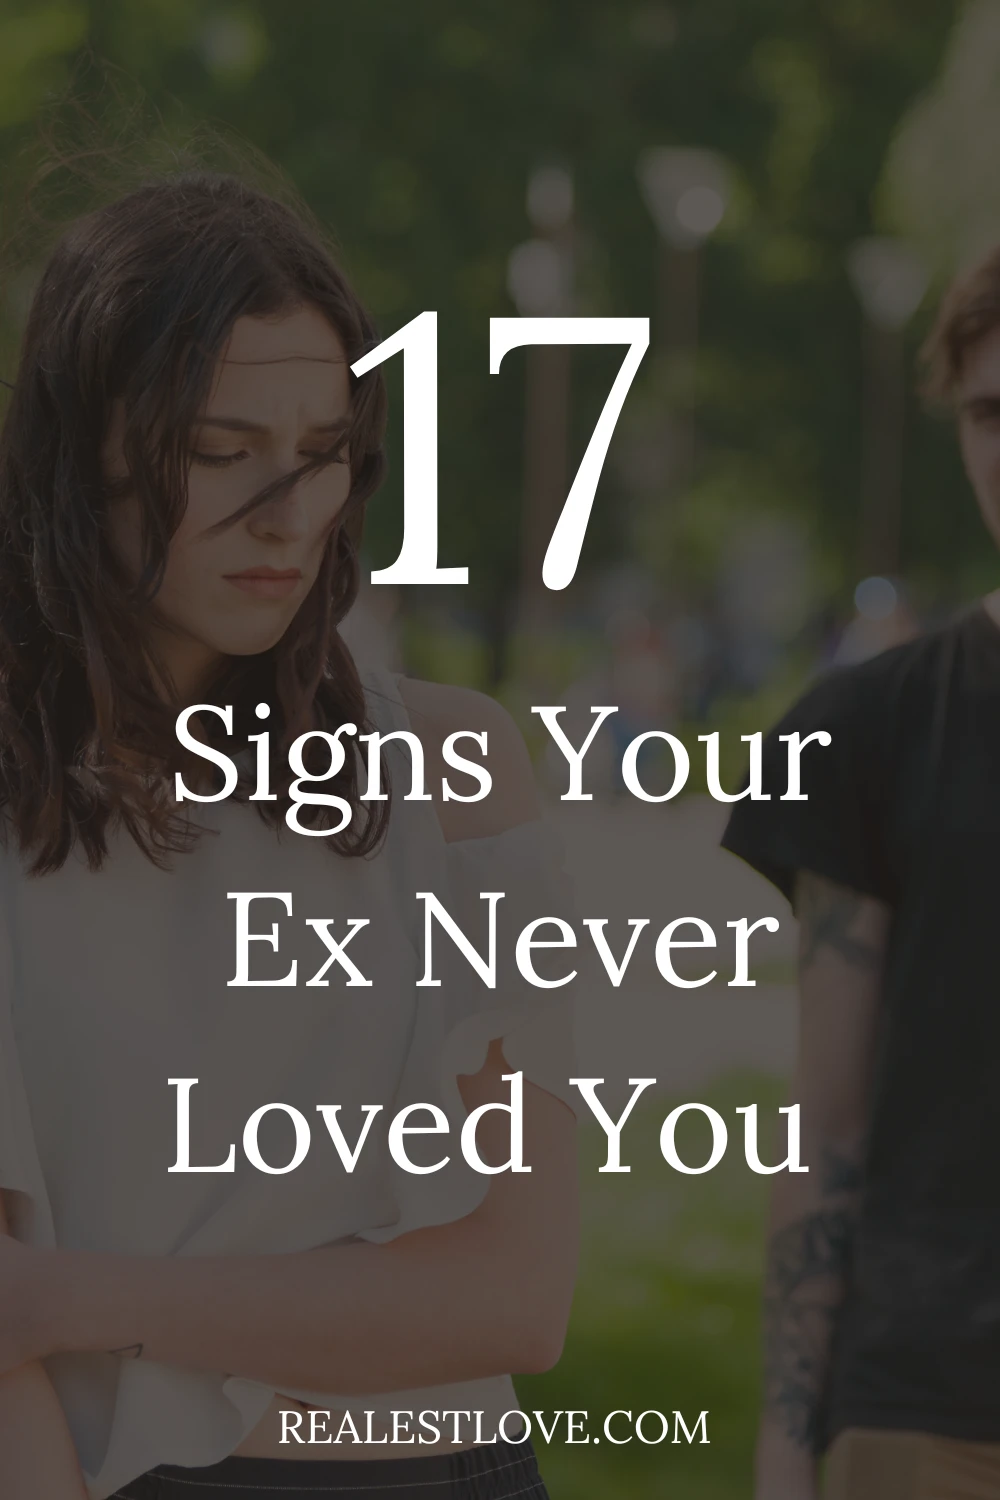 Signs Your Ex Never loved You